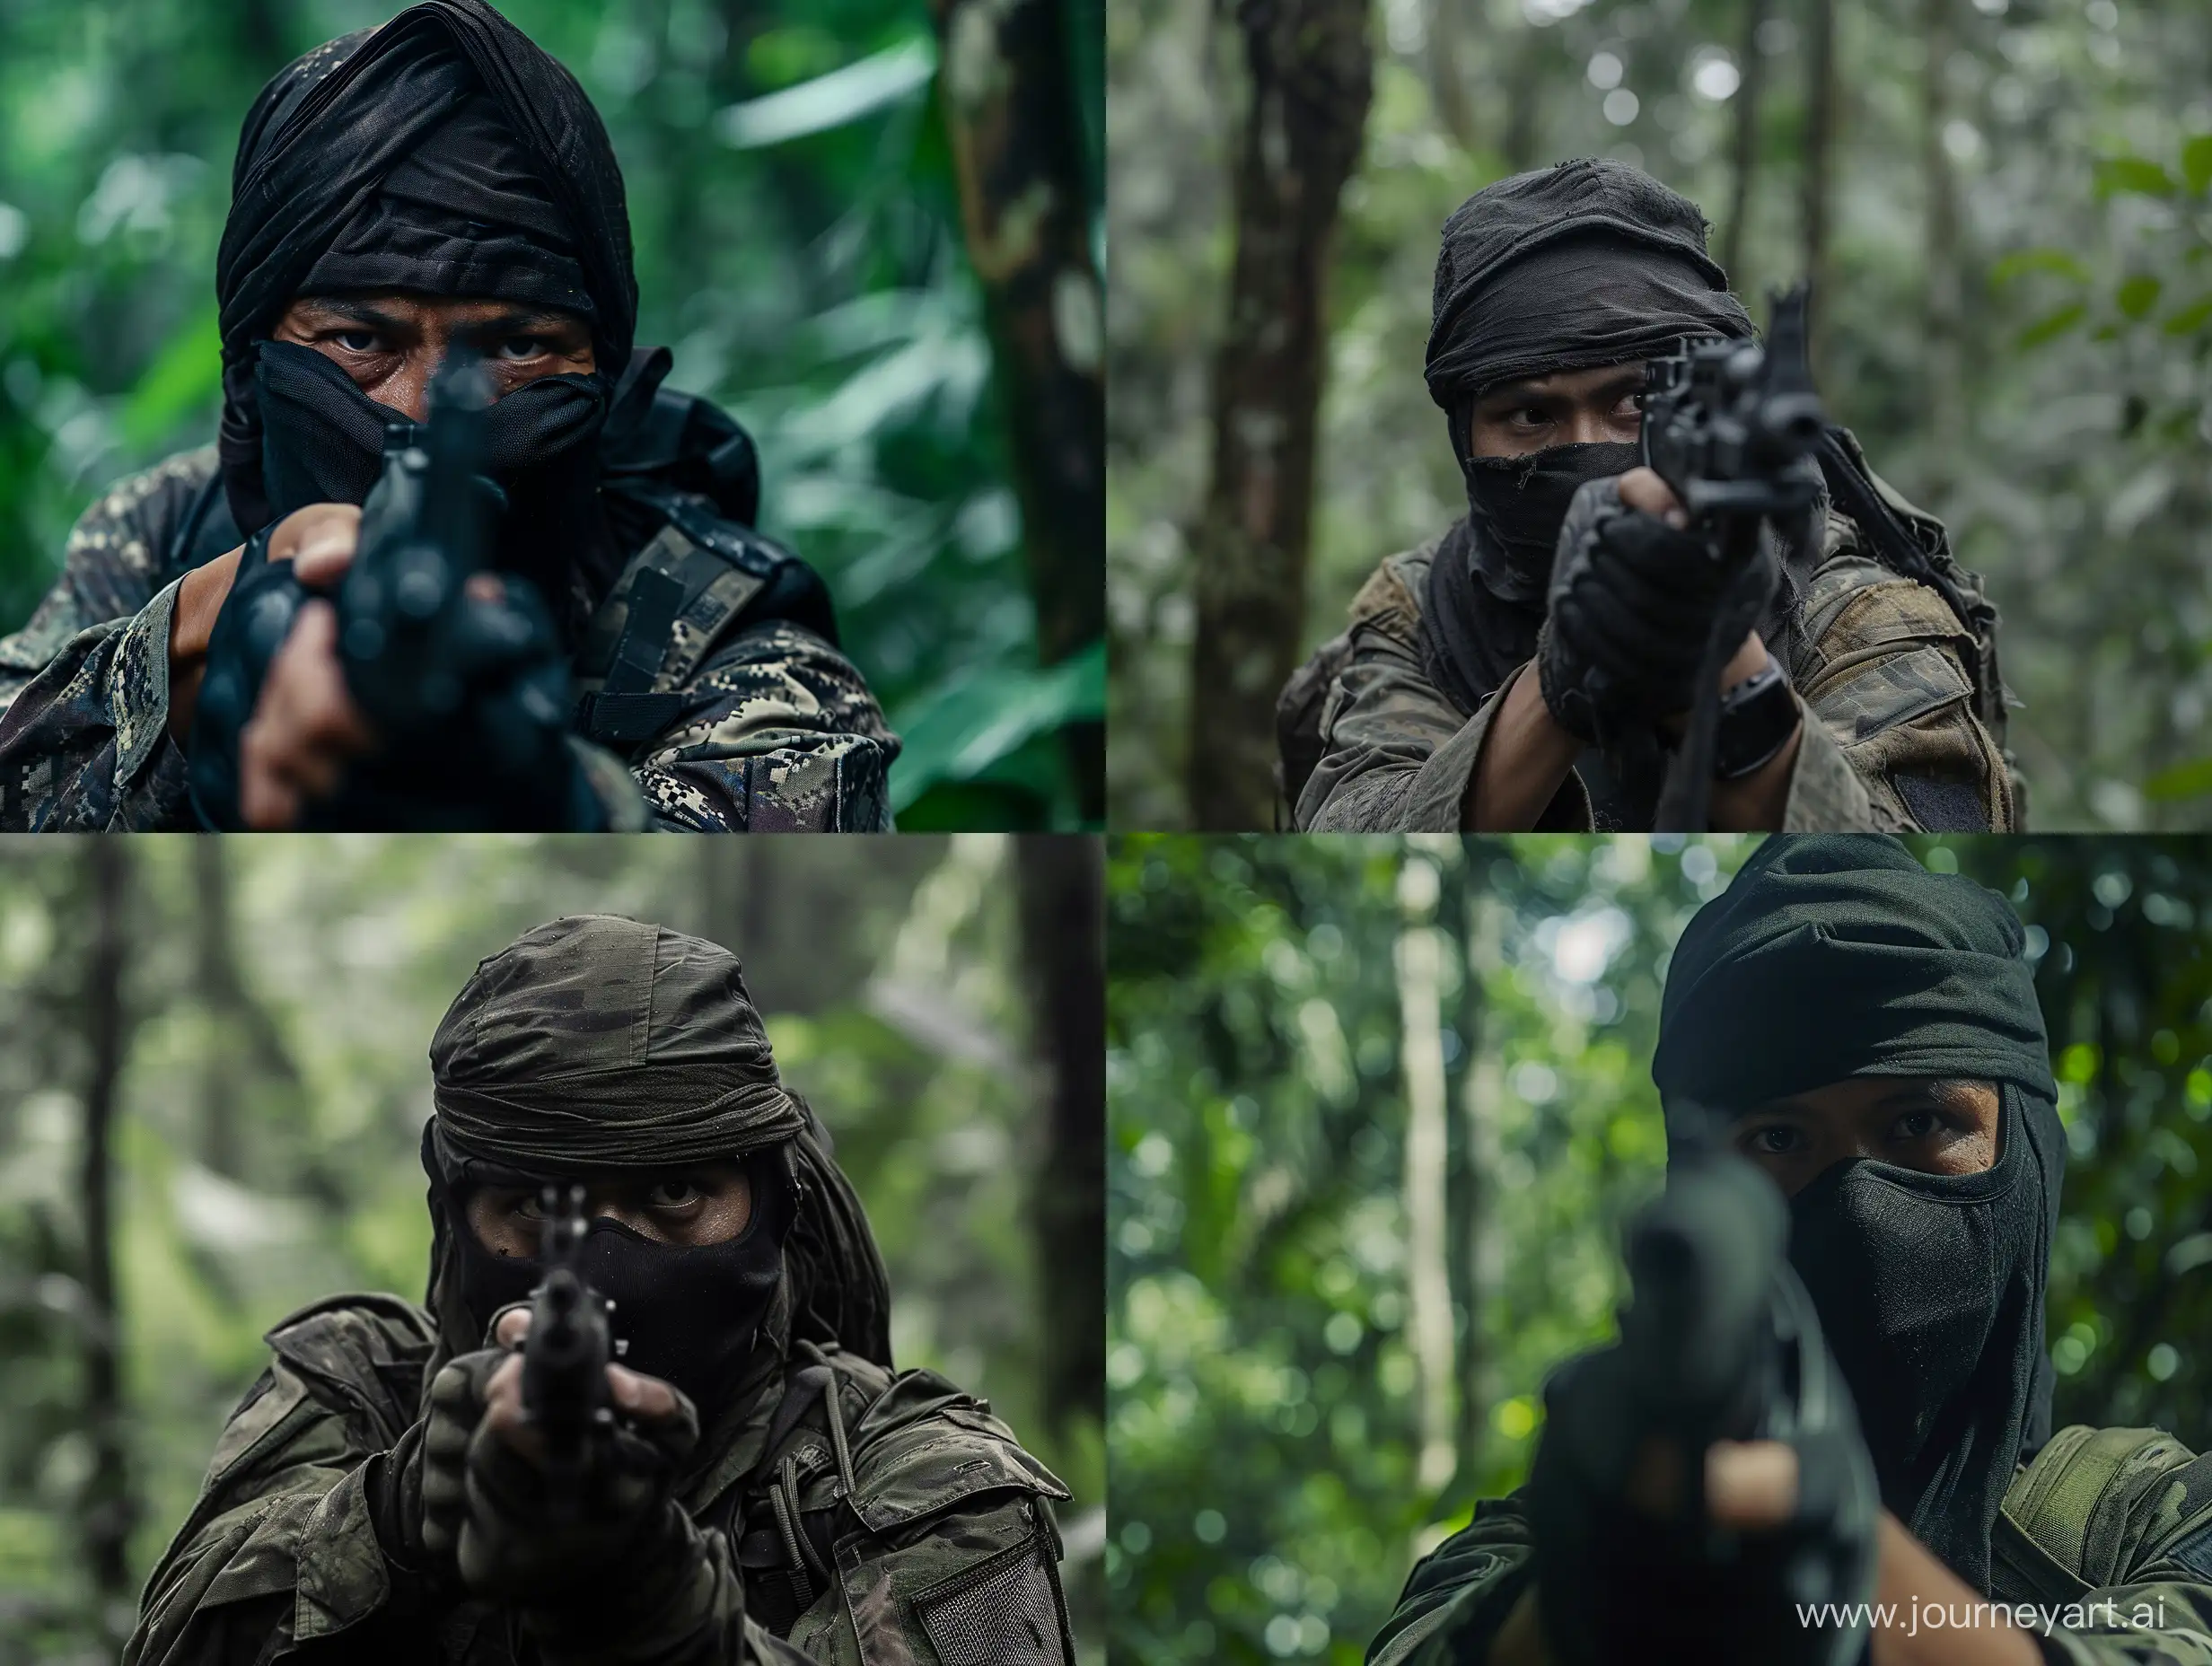 Indonesian-Soldier-with-Weapon-in-Mysterious-Forest